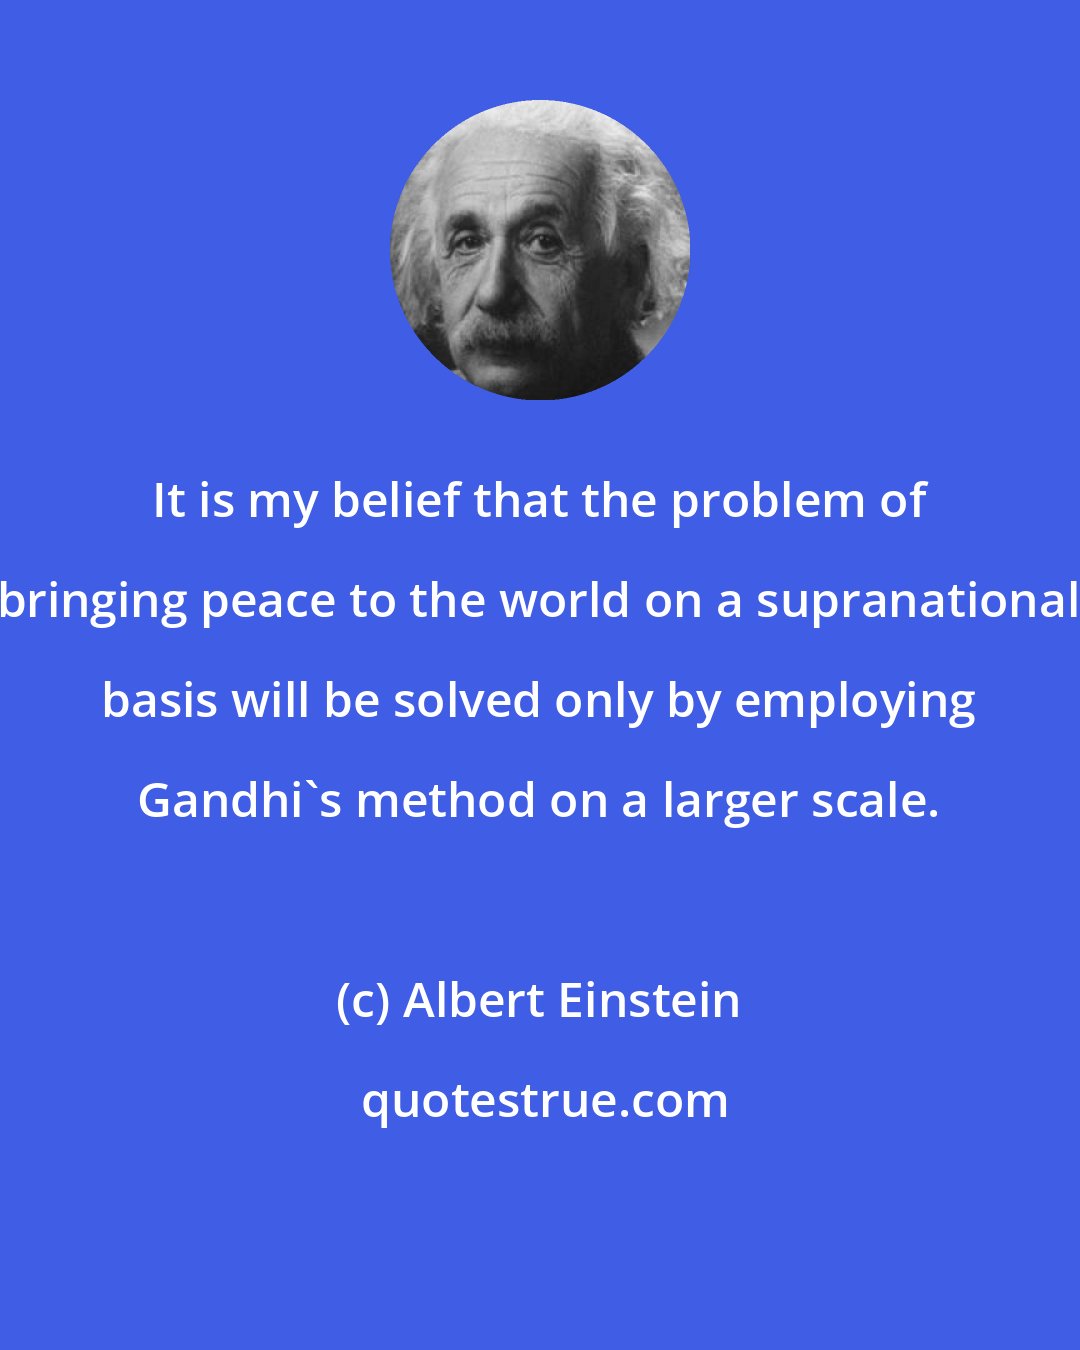 Albert Einstein: It is my belief that the problem of bringing peace to the world on a supranational basis will be solved only by employing Gandhi's method on a larger scale.